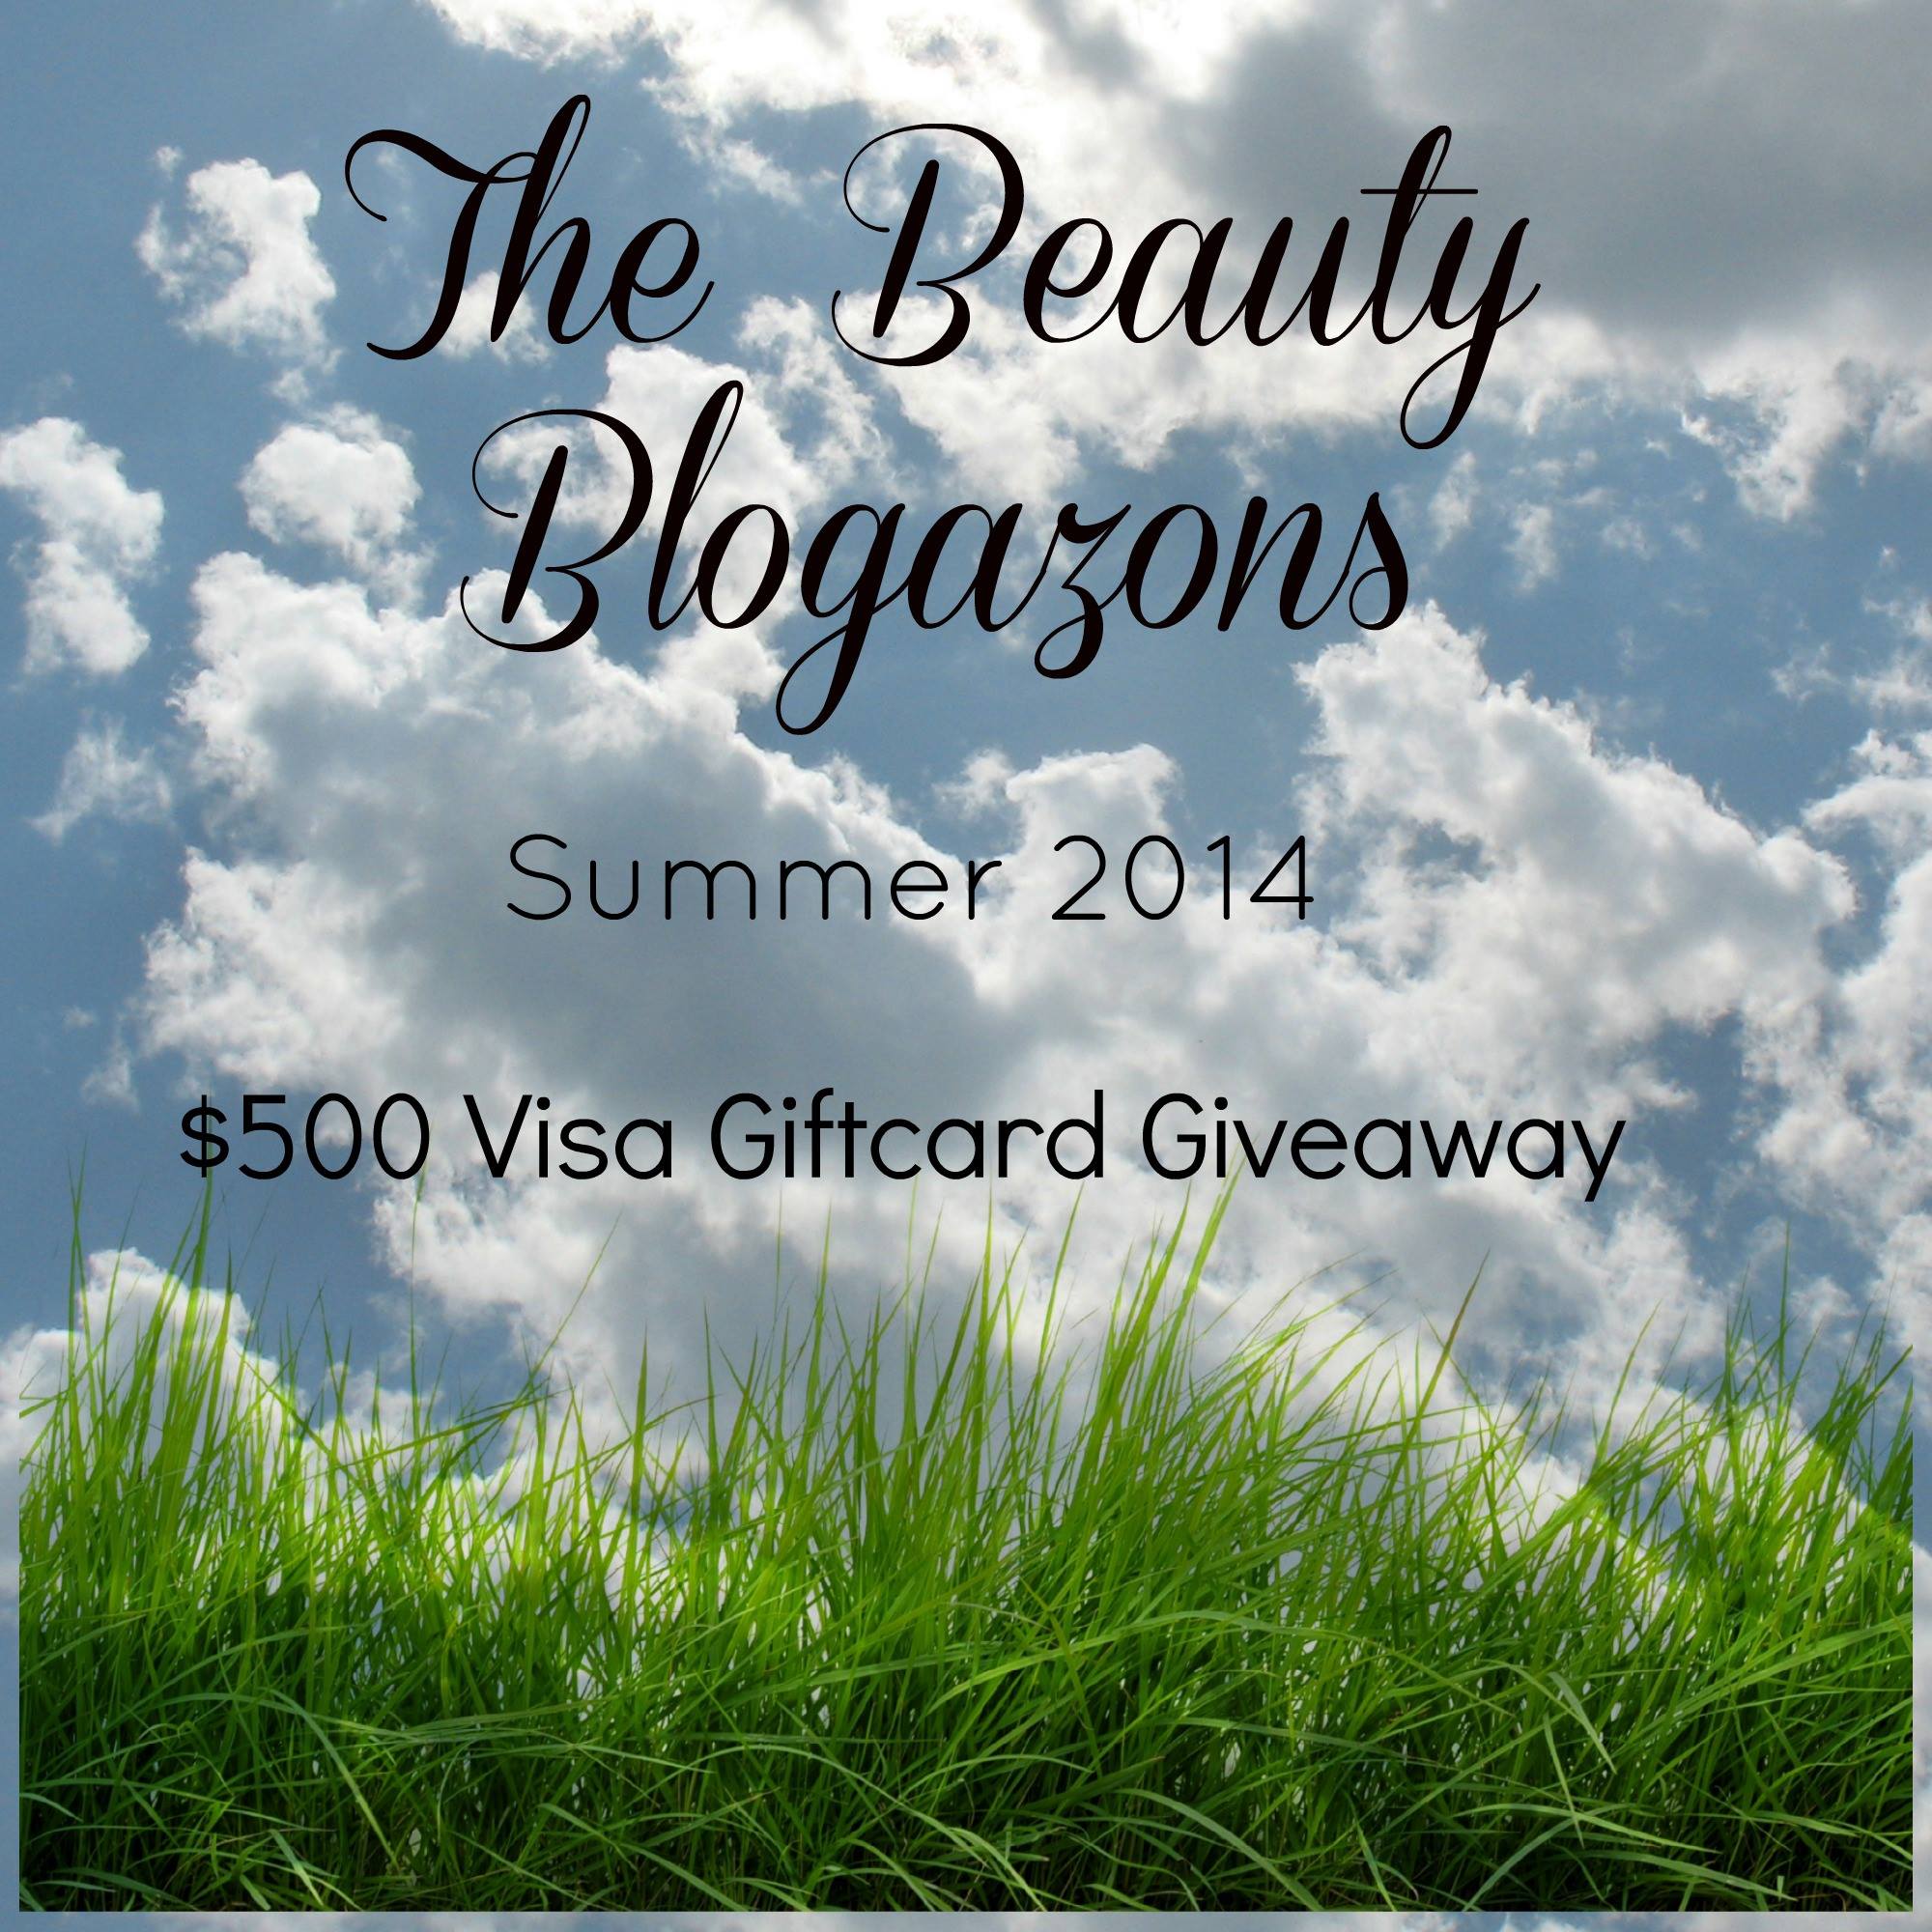 The Beauty Blogazons Summer 2014 $500 Giftcard Giveaway! graphic